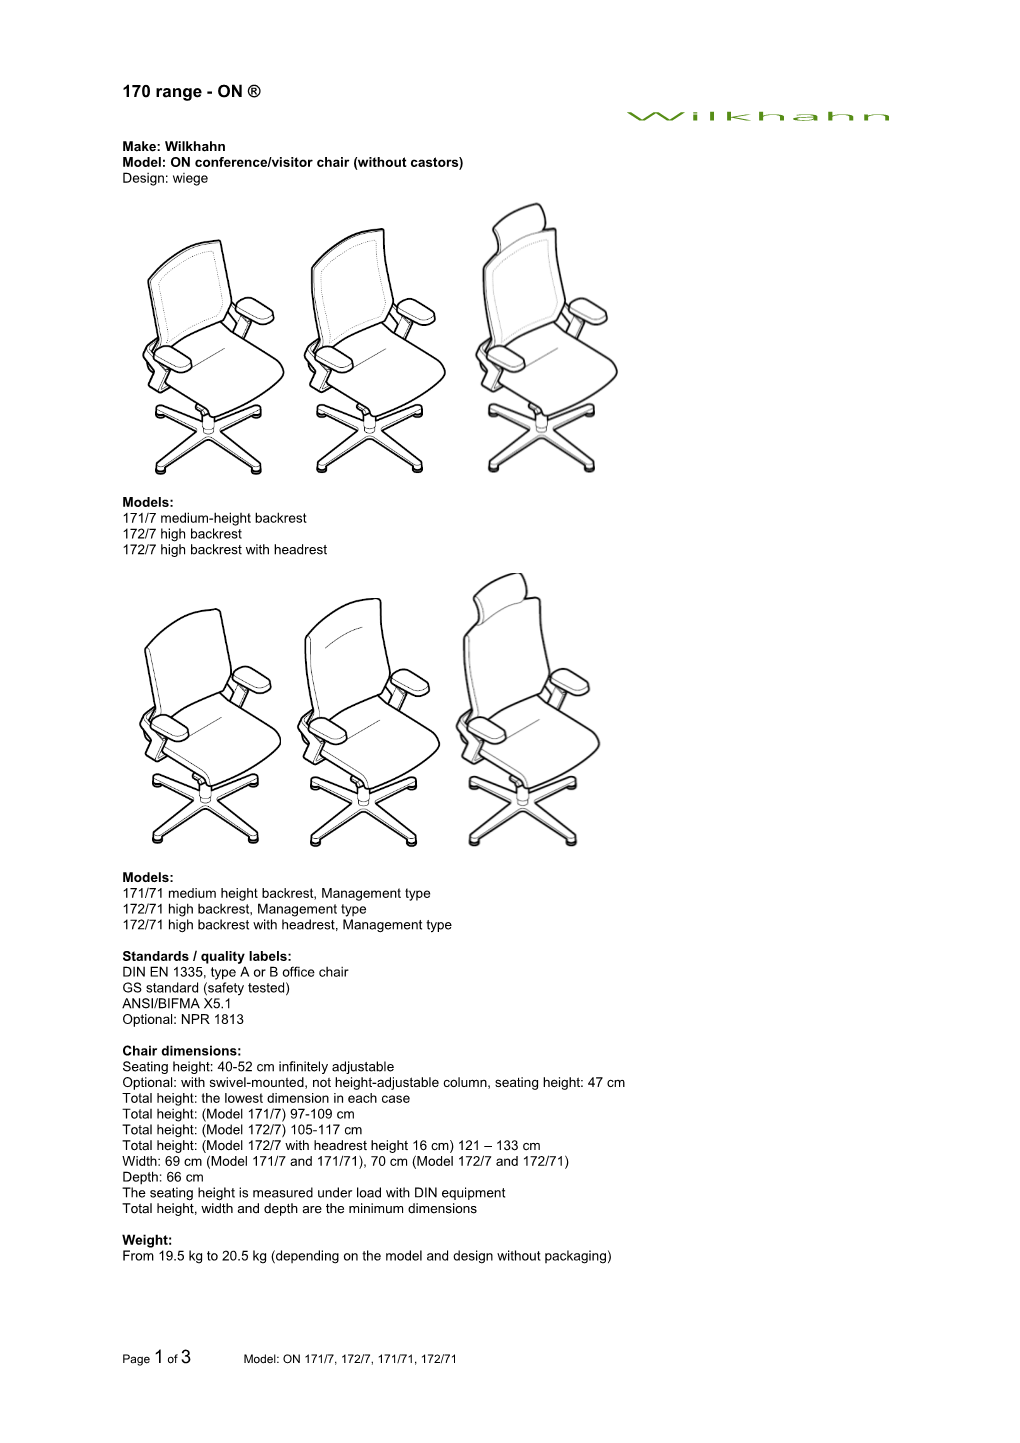 Model:ON Conference/Visitor Chair (Without Castors)